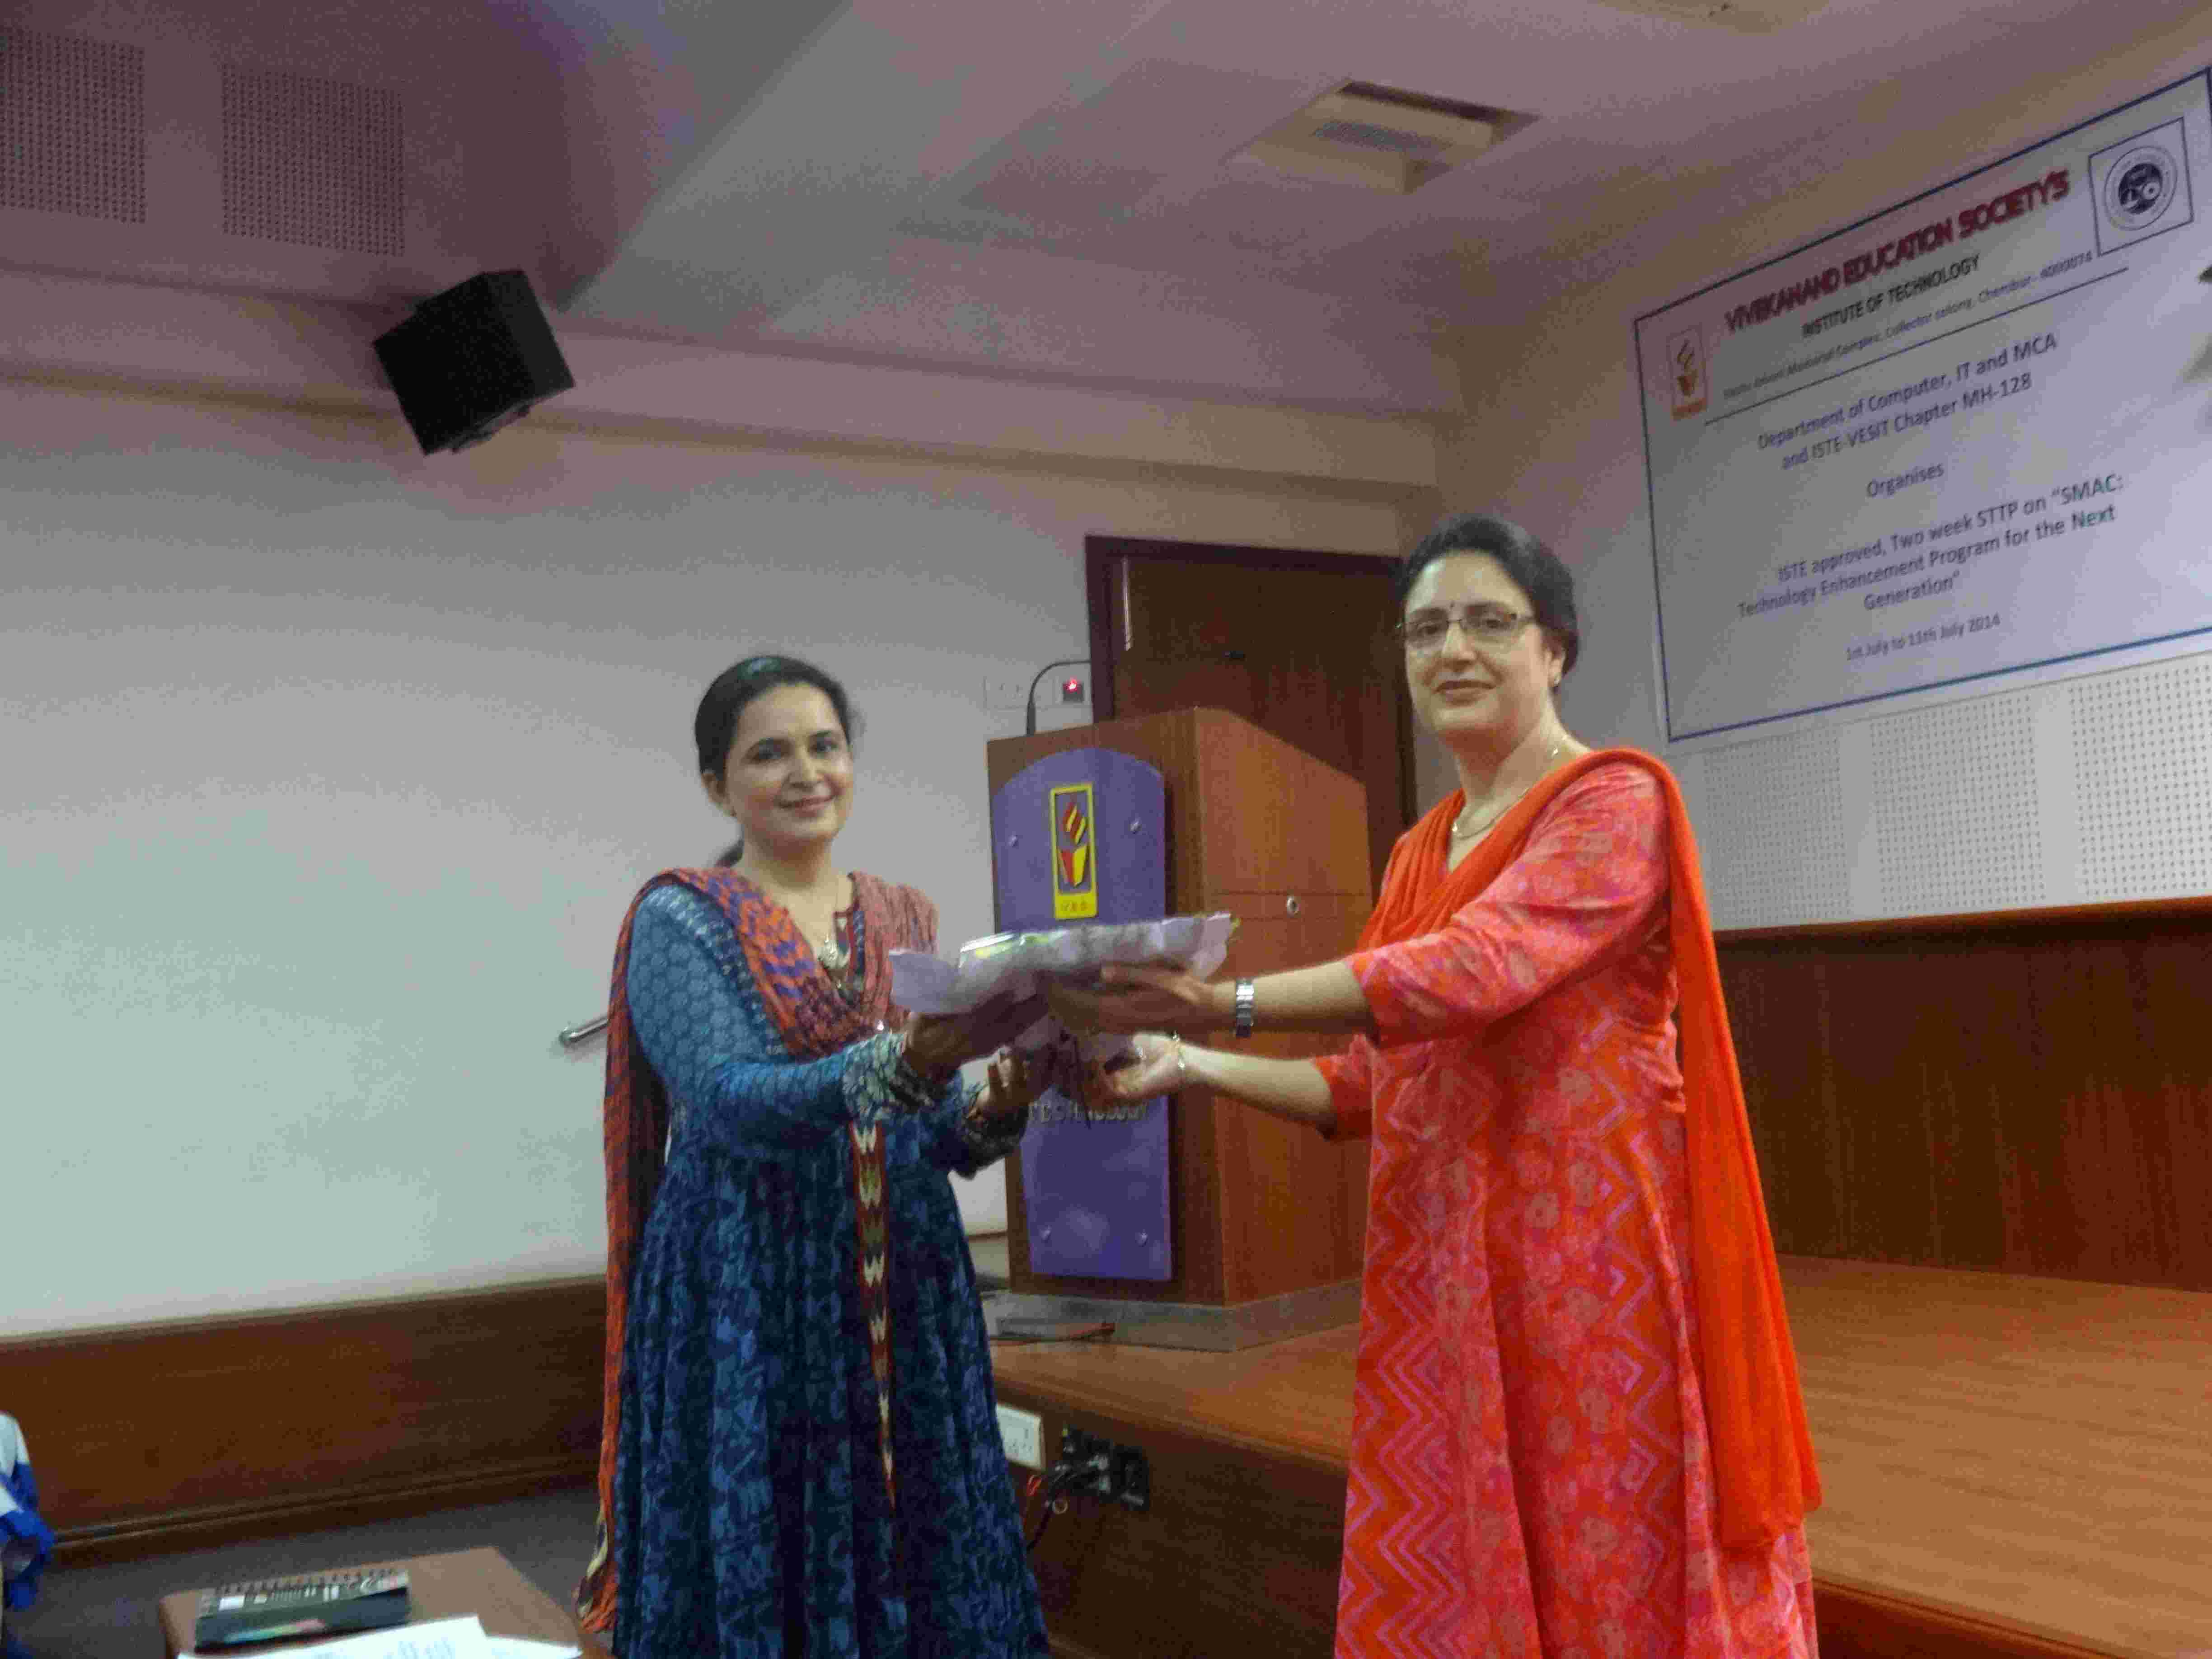 Guest speaker at Vivekanand Education Society's Institute of Technology - Mumbai